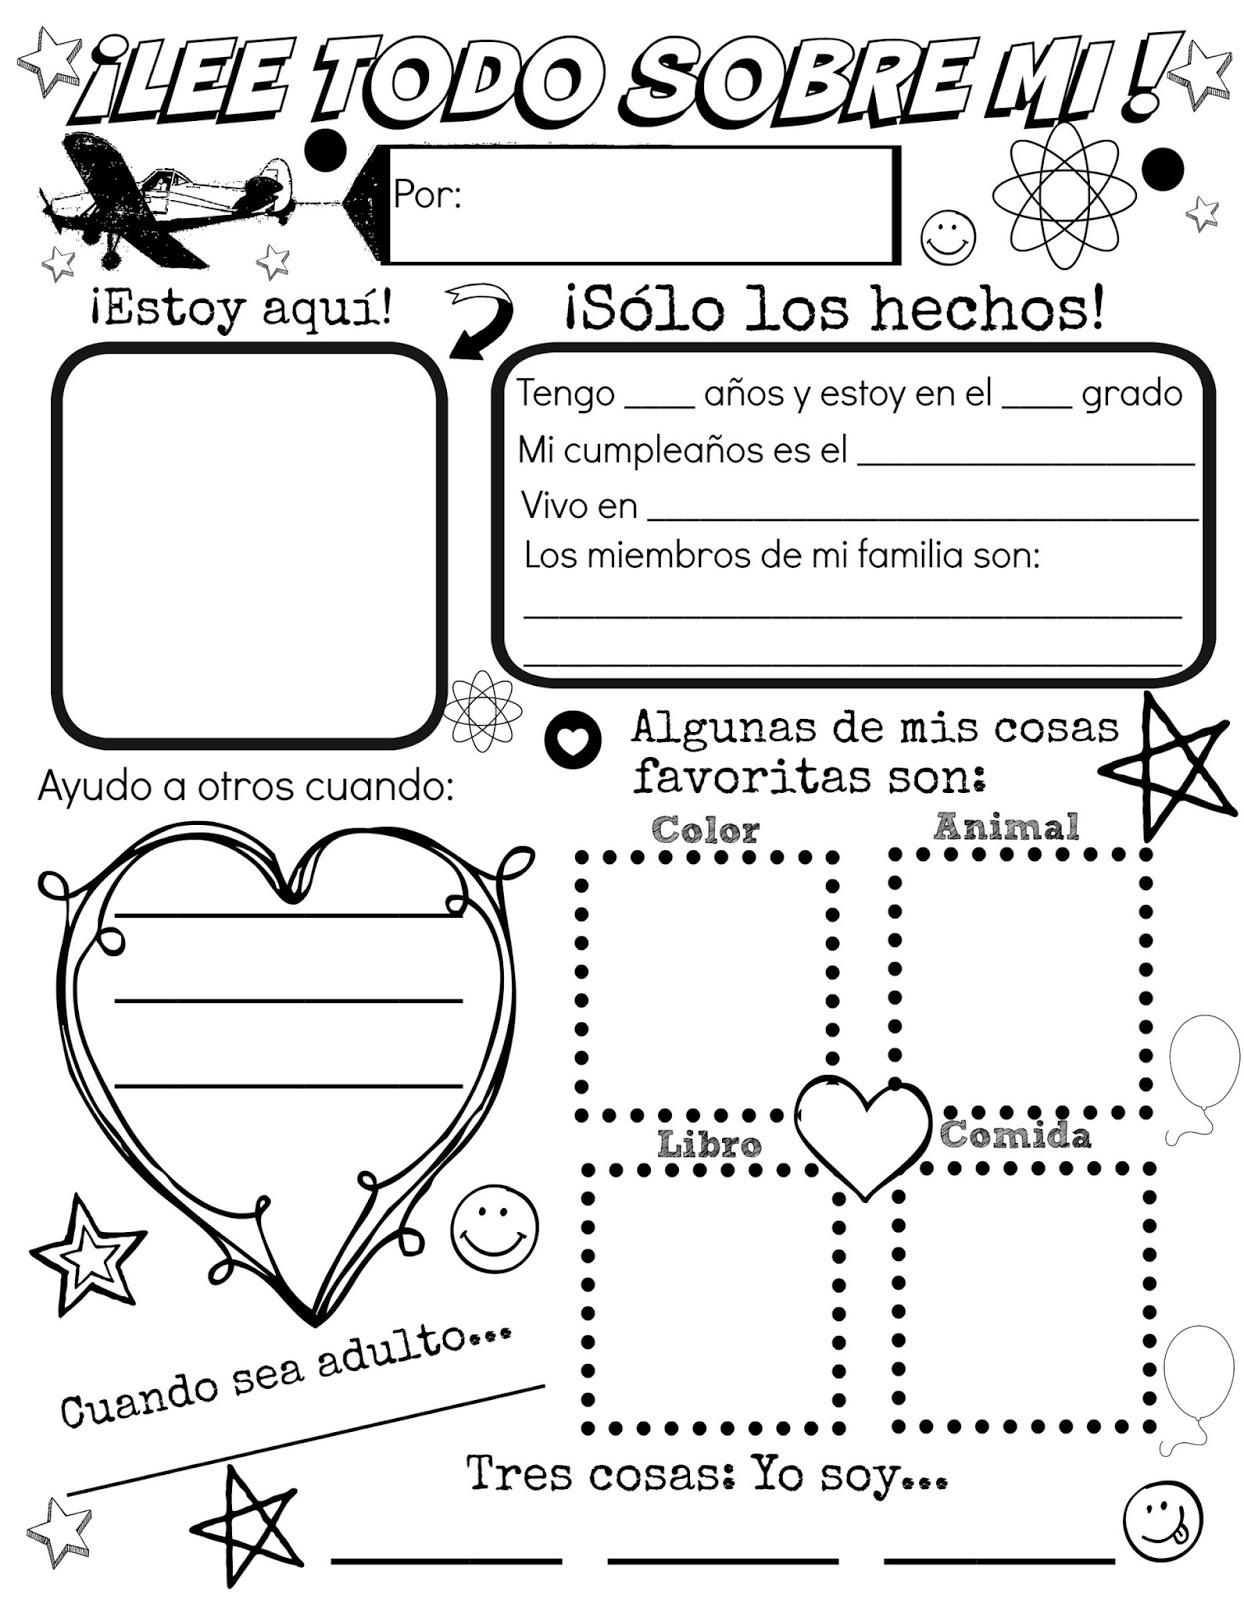 All About Me {Free Spanish Printable} | Discovering The World - All About Me Free Printable